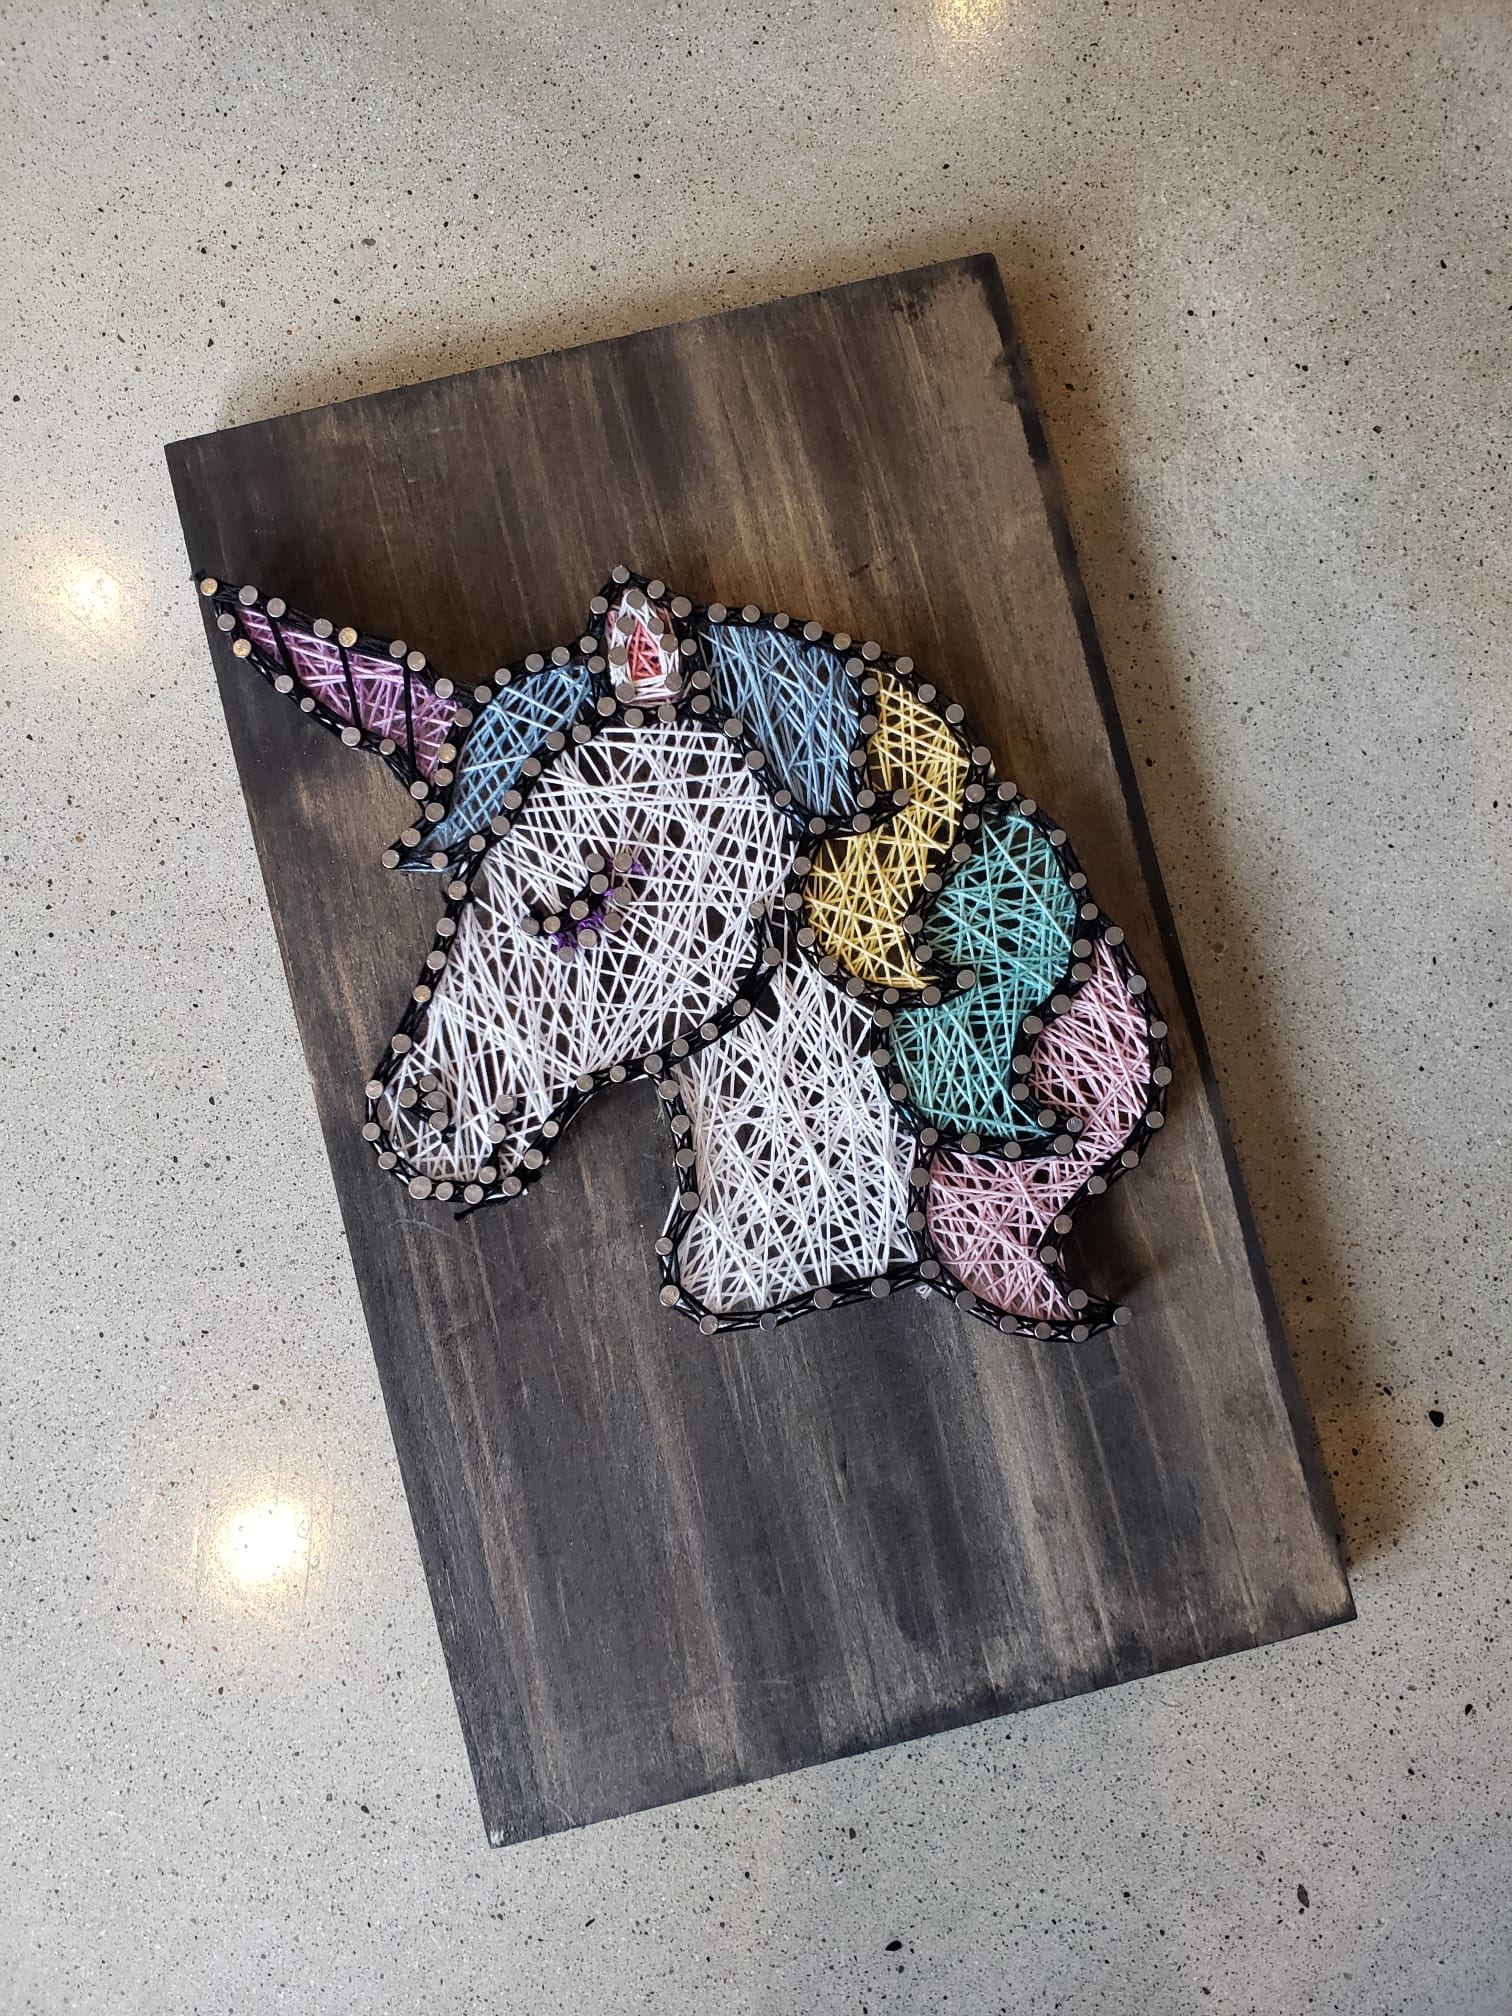 A Completed DIY String Art of a Unicorn at Paint Cabin